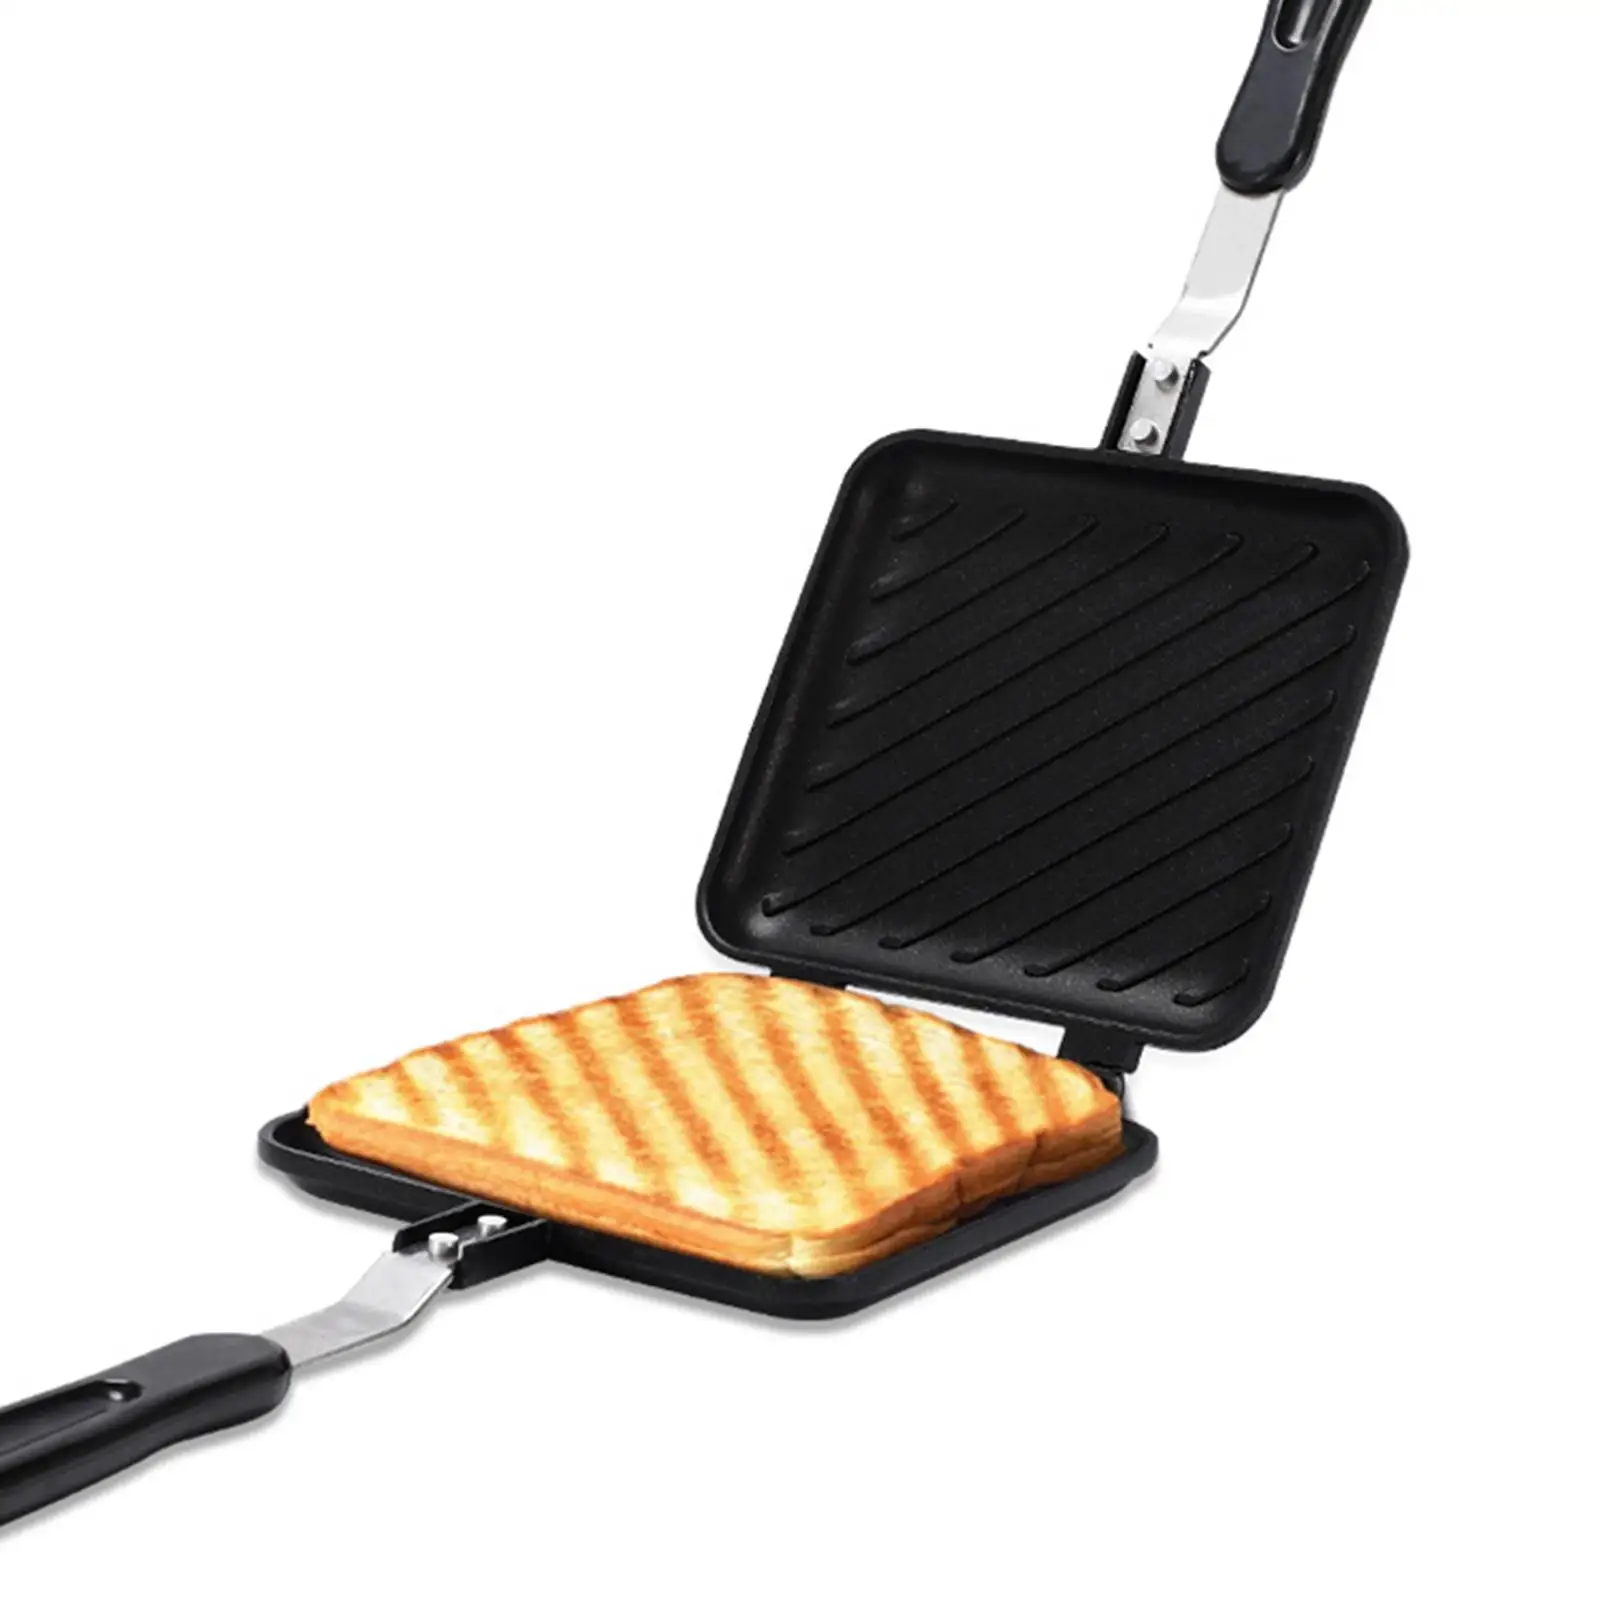 Dual Sided Heating Cooking Pan Long Handle Nonstick Skillet Cake Maker Pan Rectangle Non Stick for Electric Ceramic Stove